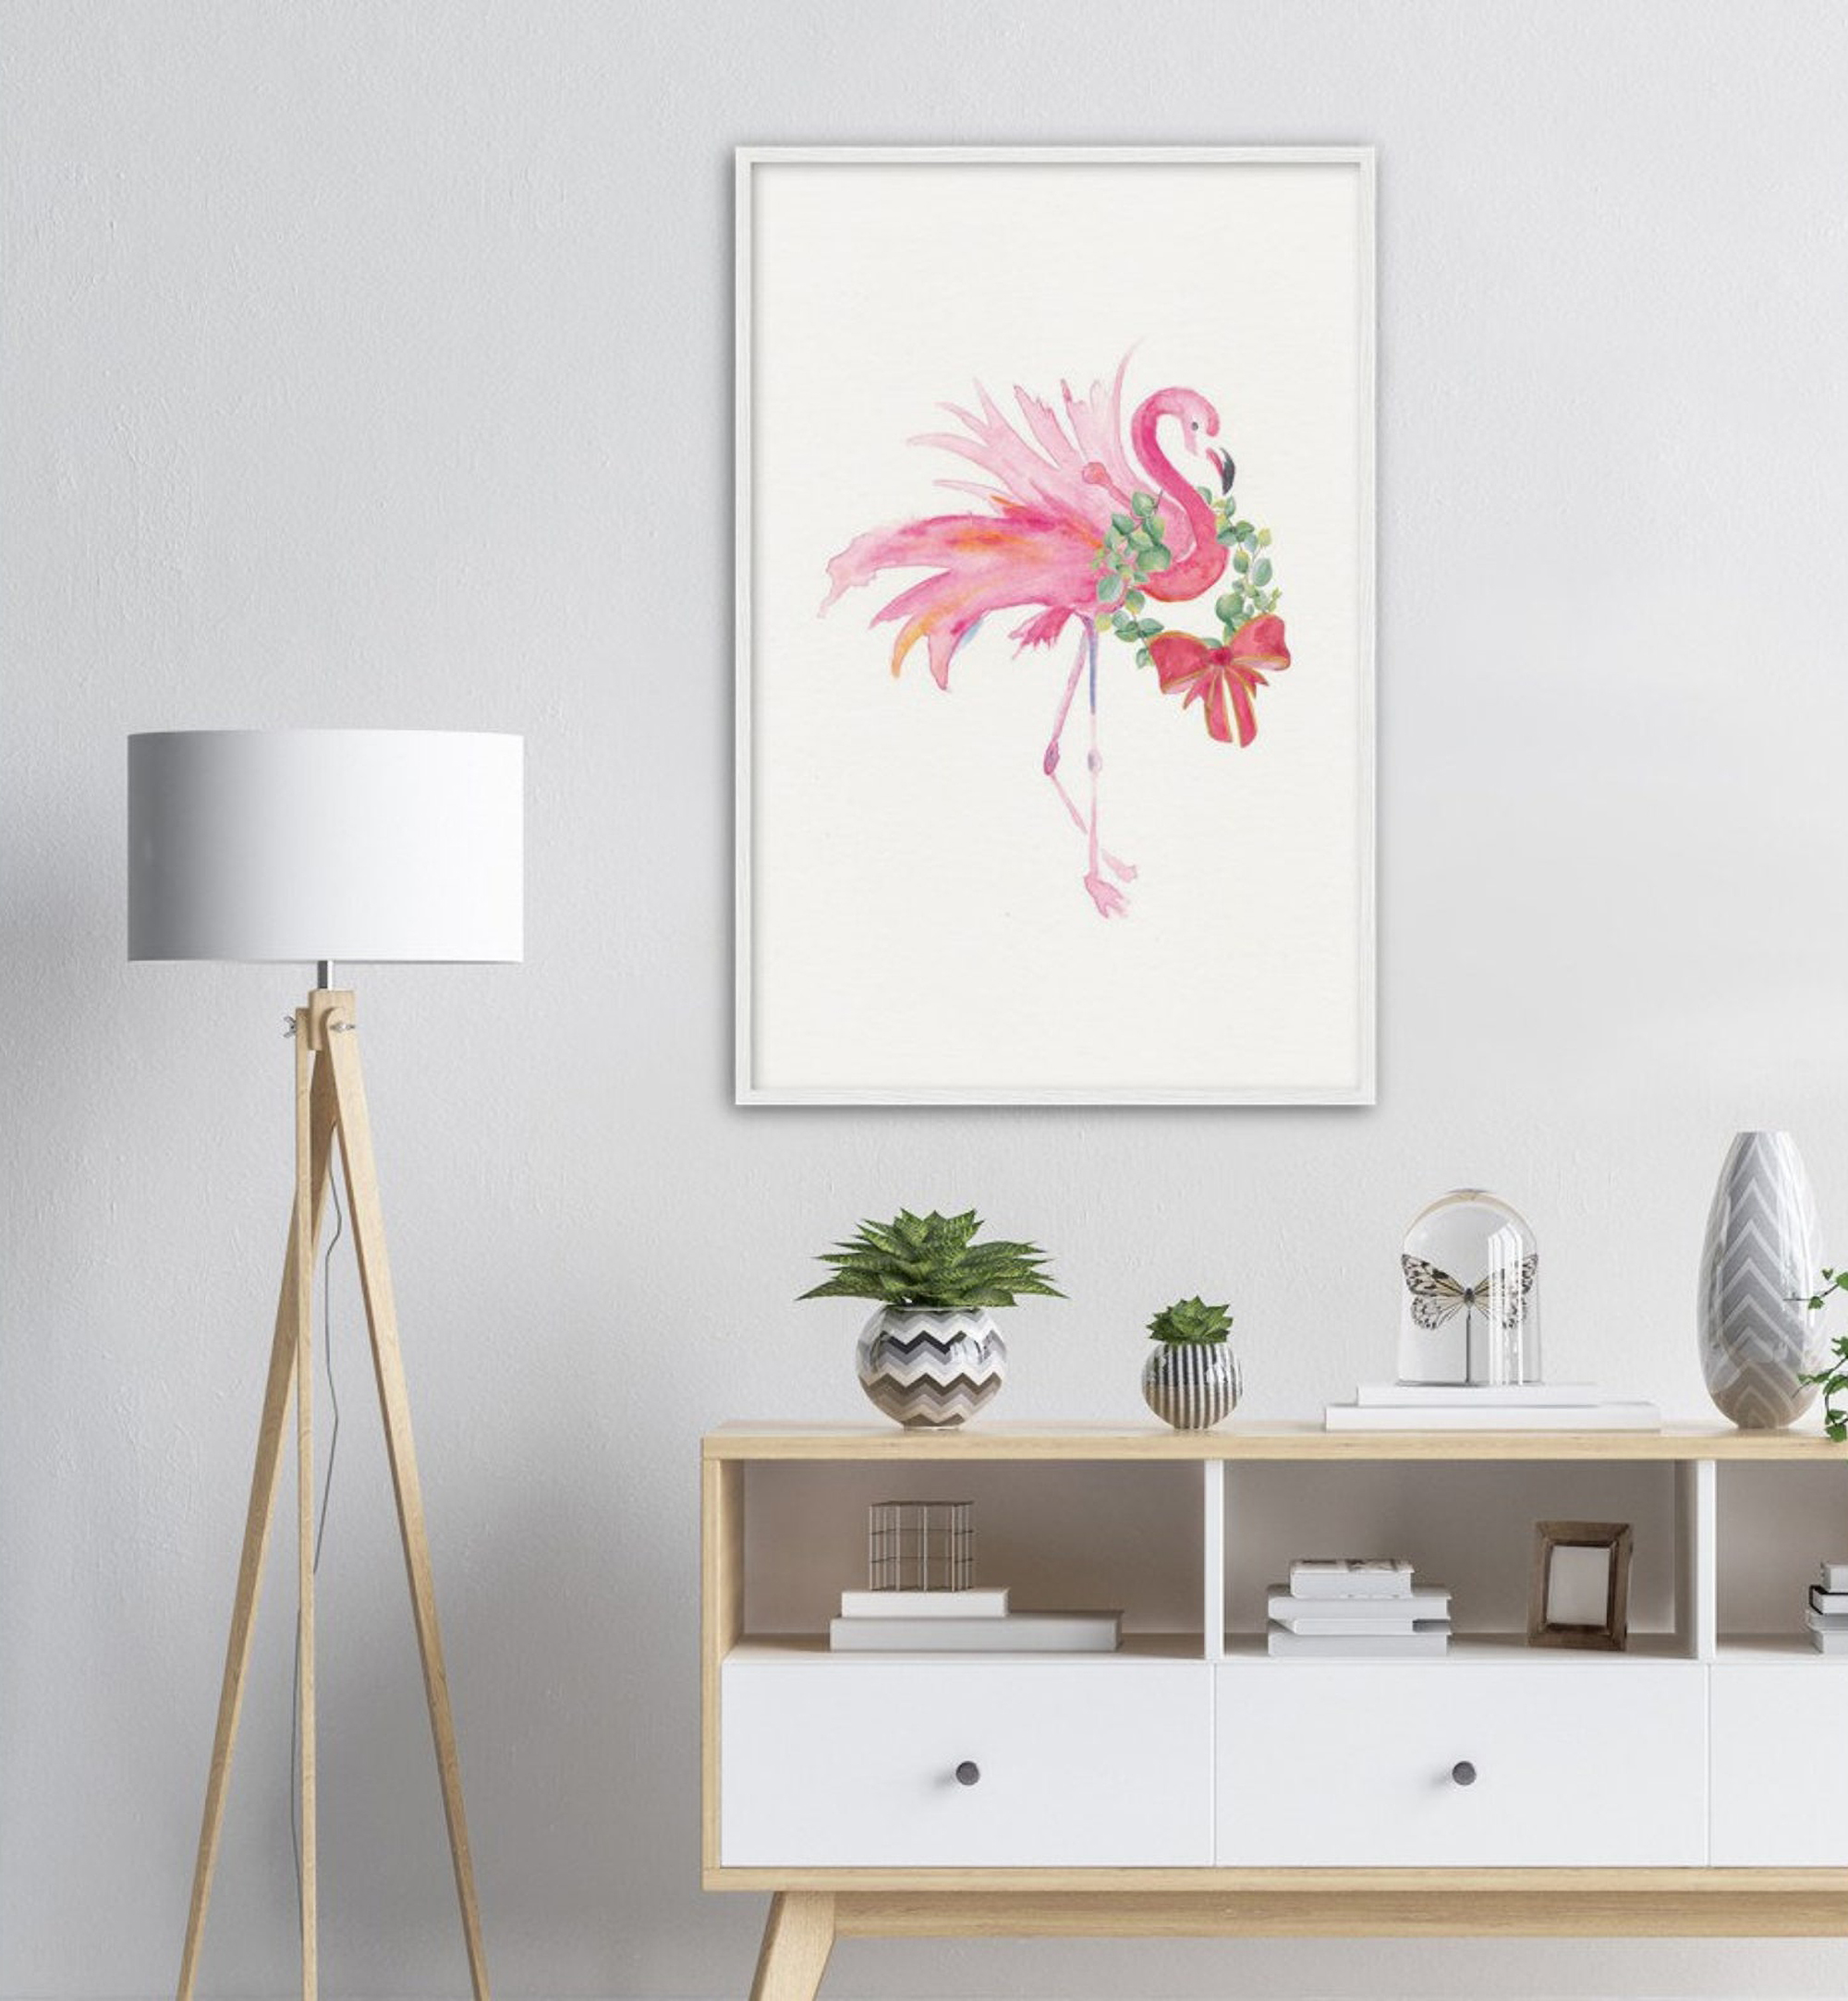 Click to shop pink flamingo with wreath watercolor print at VG Invites on Etsy.